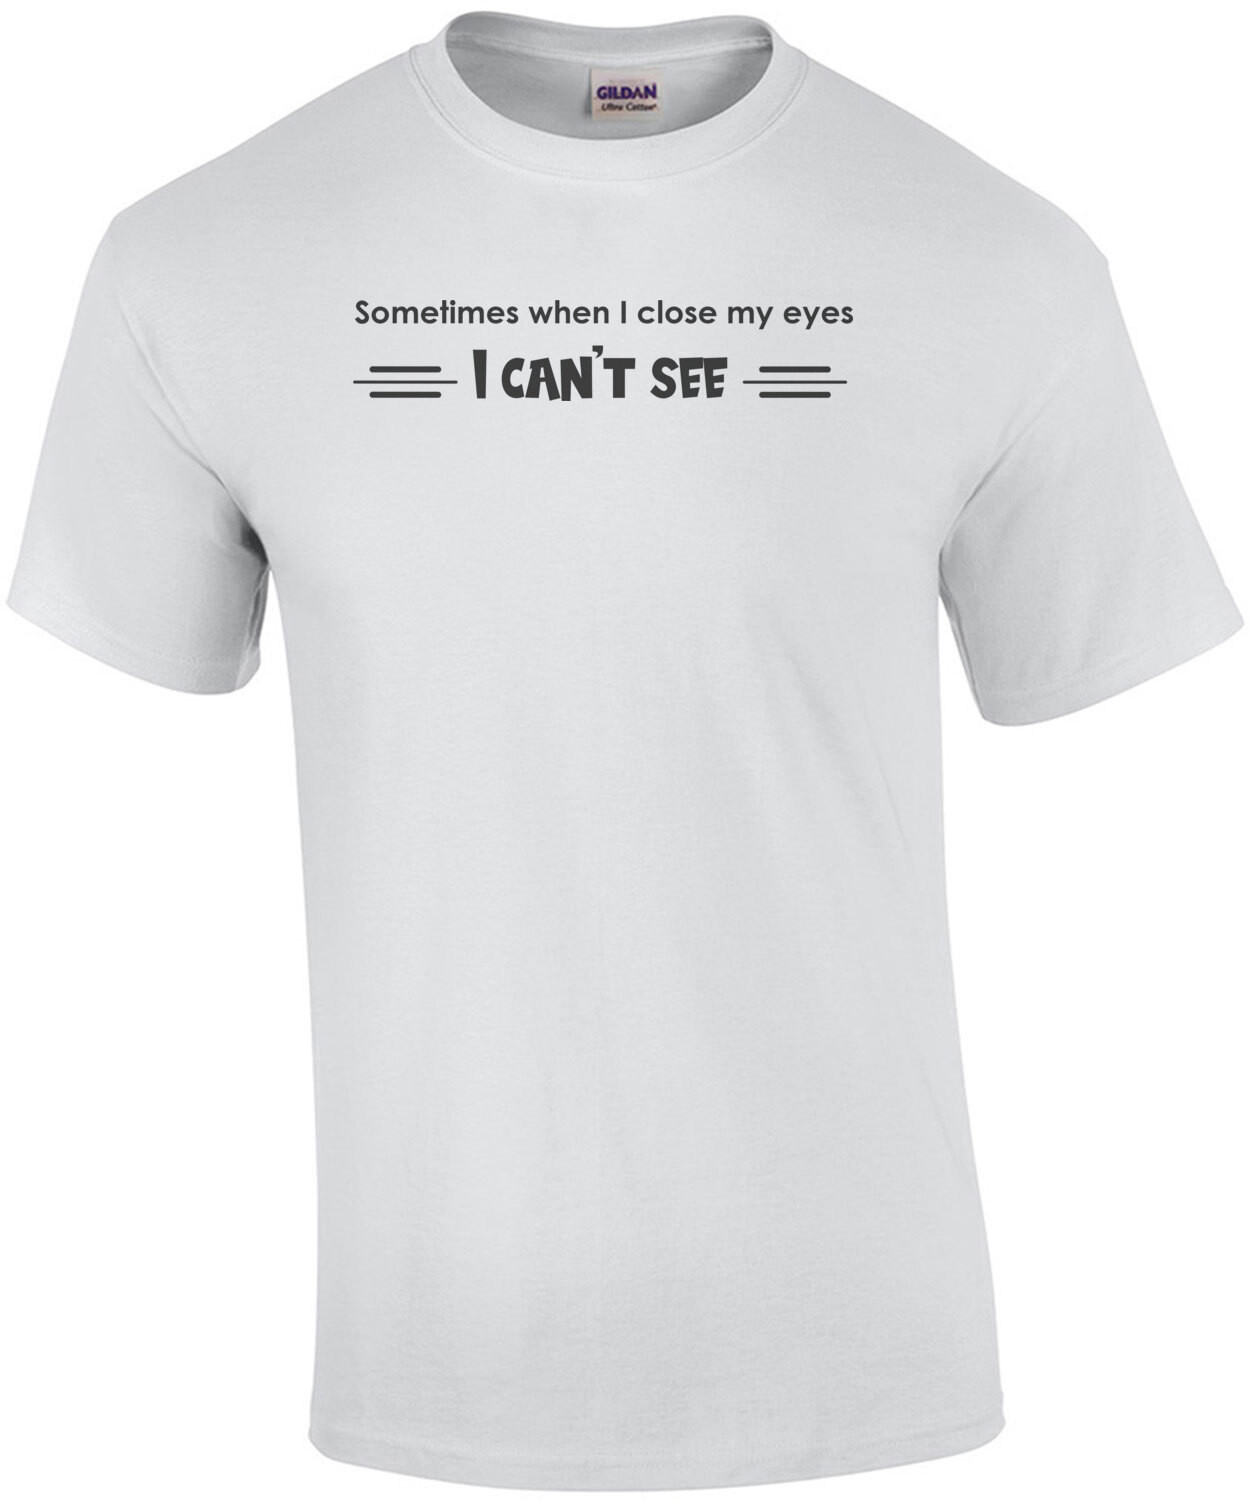 Sometimes When I Close My Eyes, I Can't See. T-Shirt